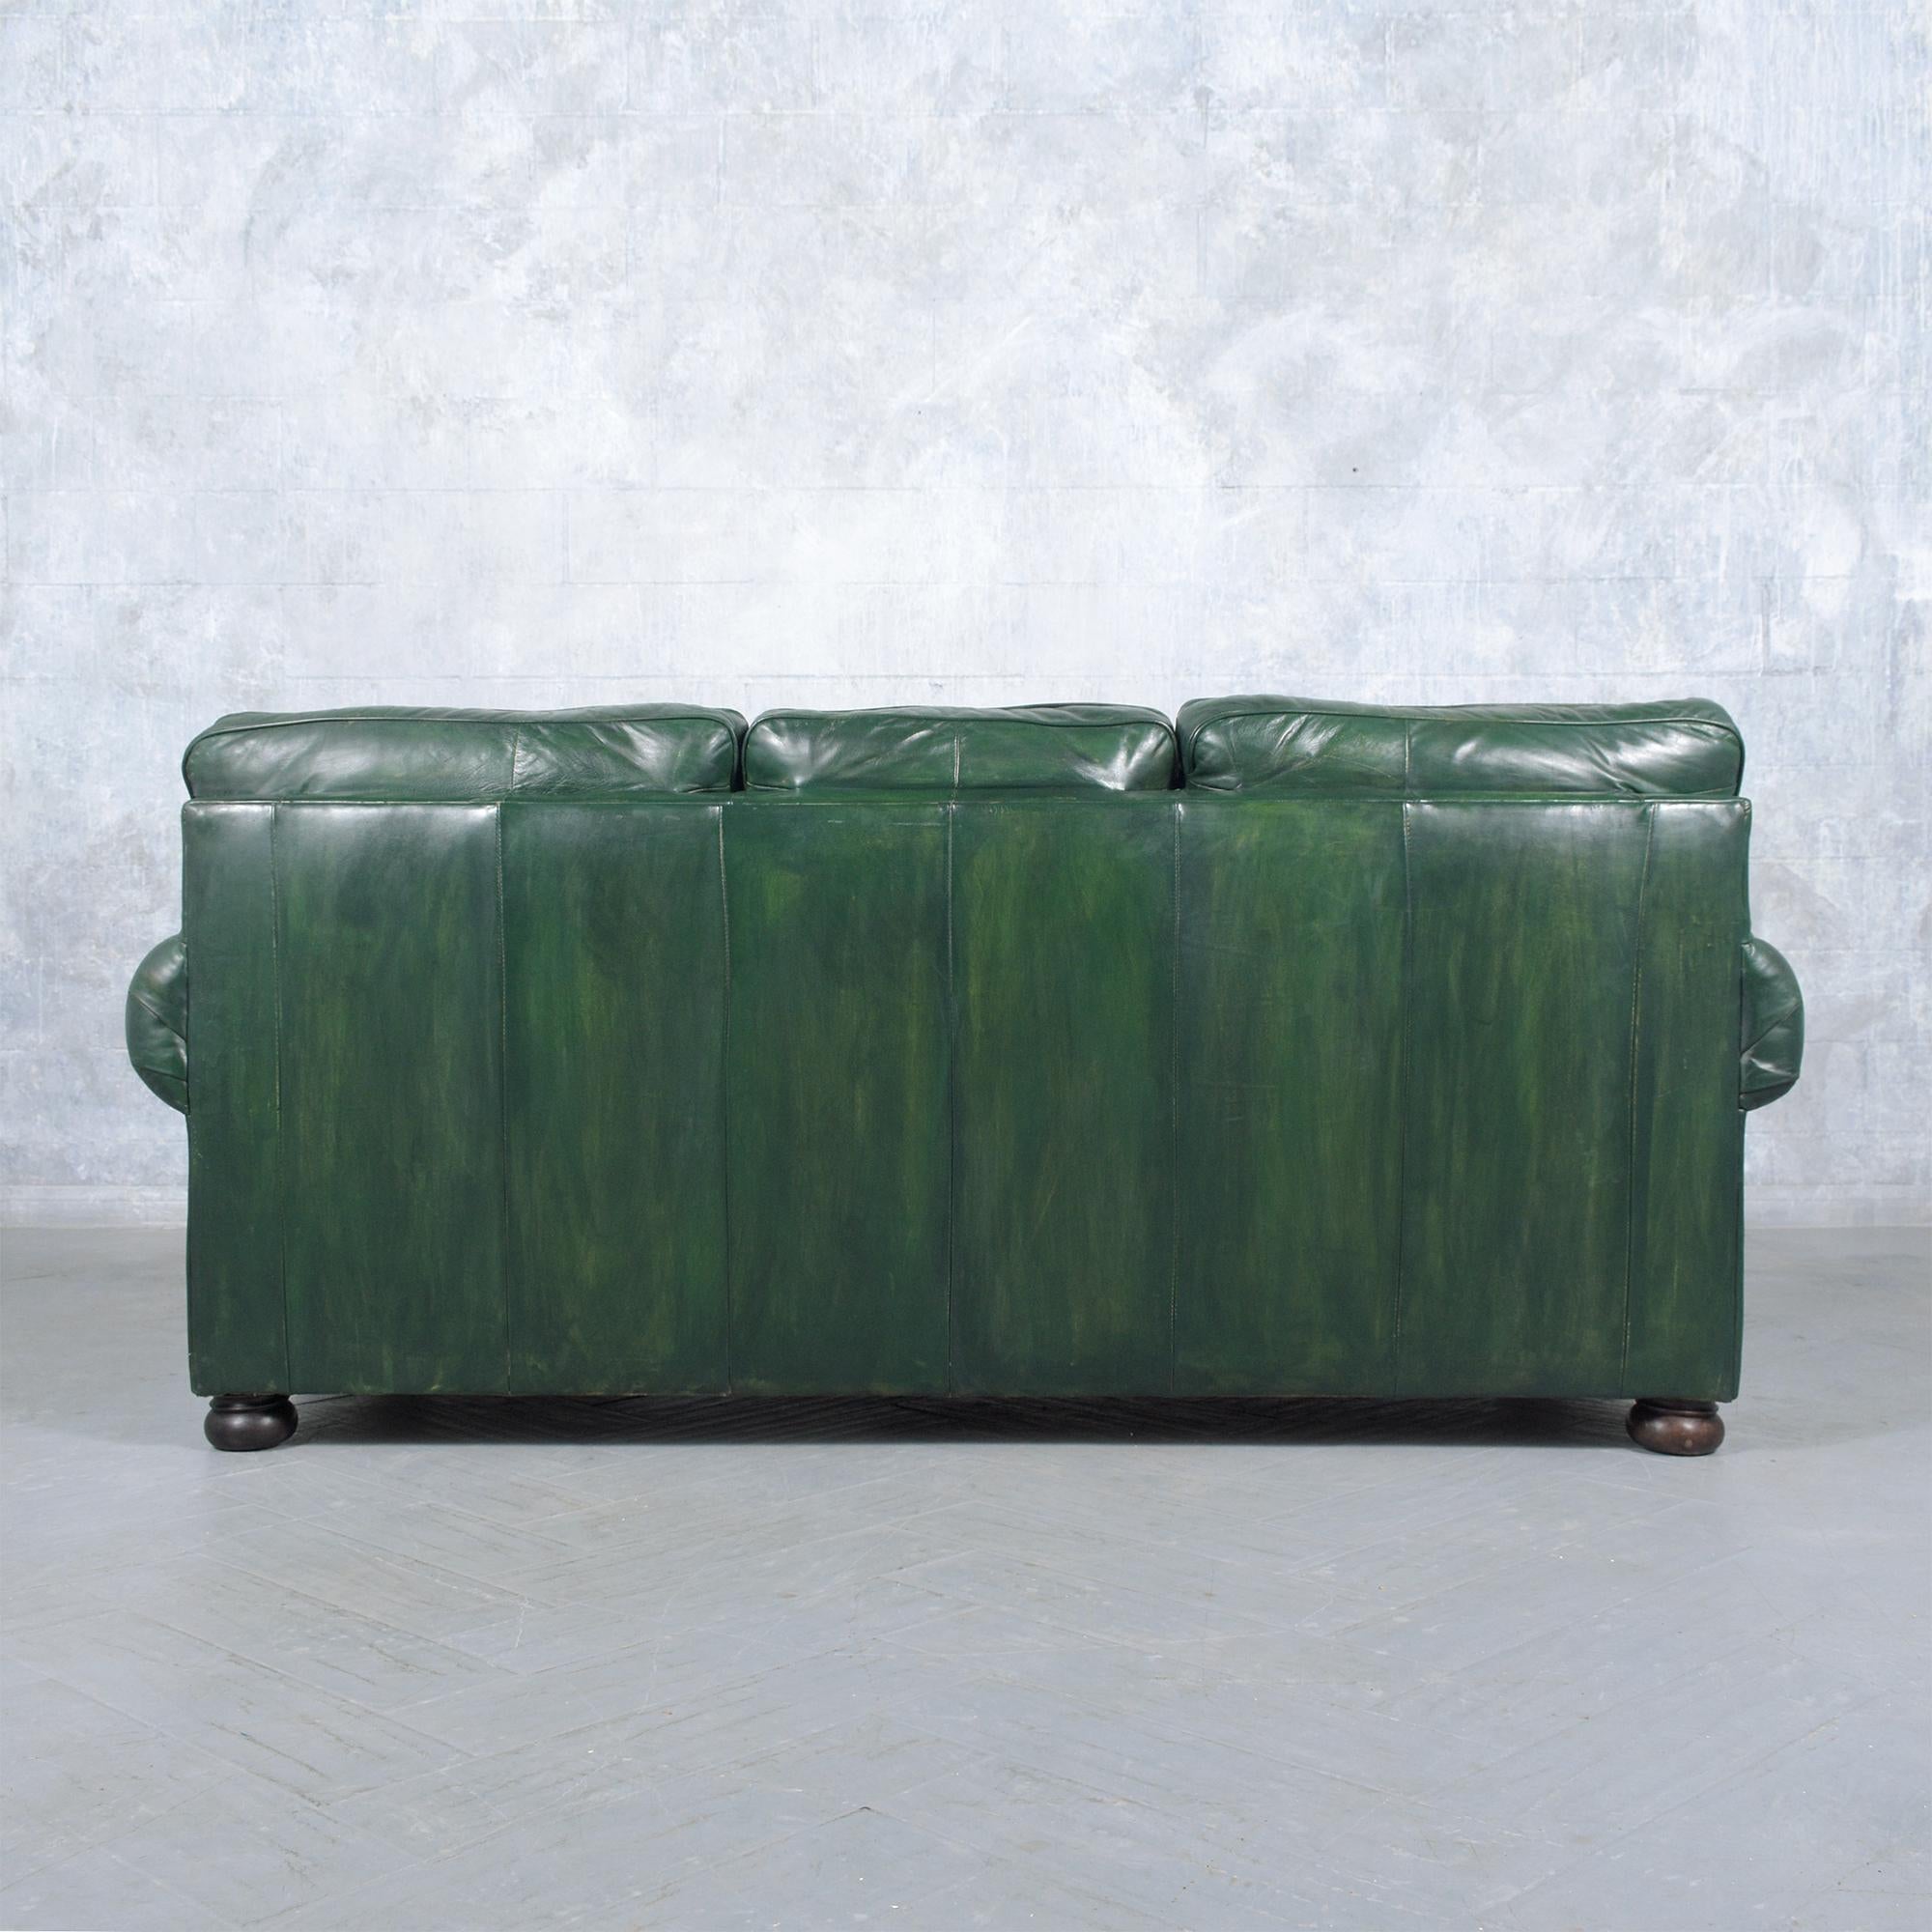 Restored 1980s Vintage Leather Sofa in Dark Green with Carved Bun Legs For Sale 6